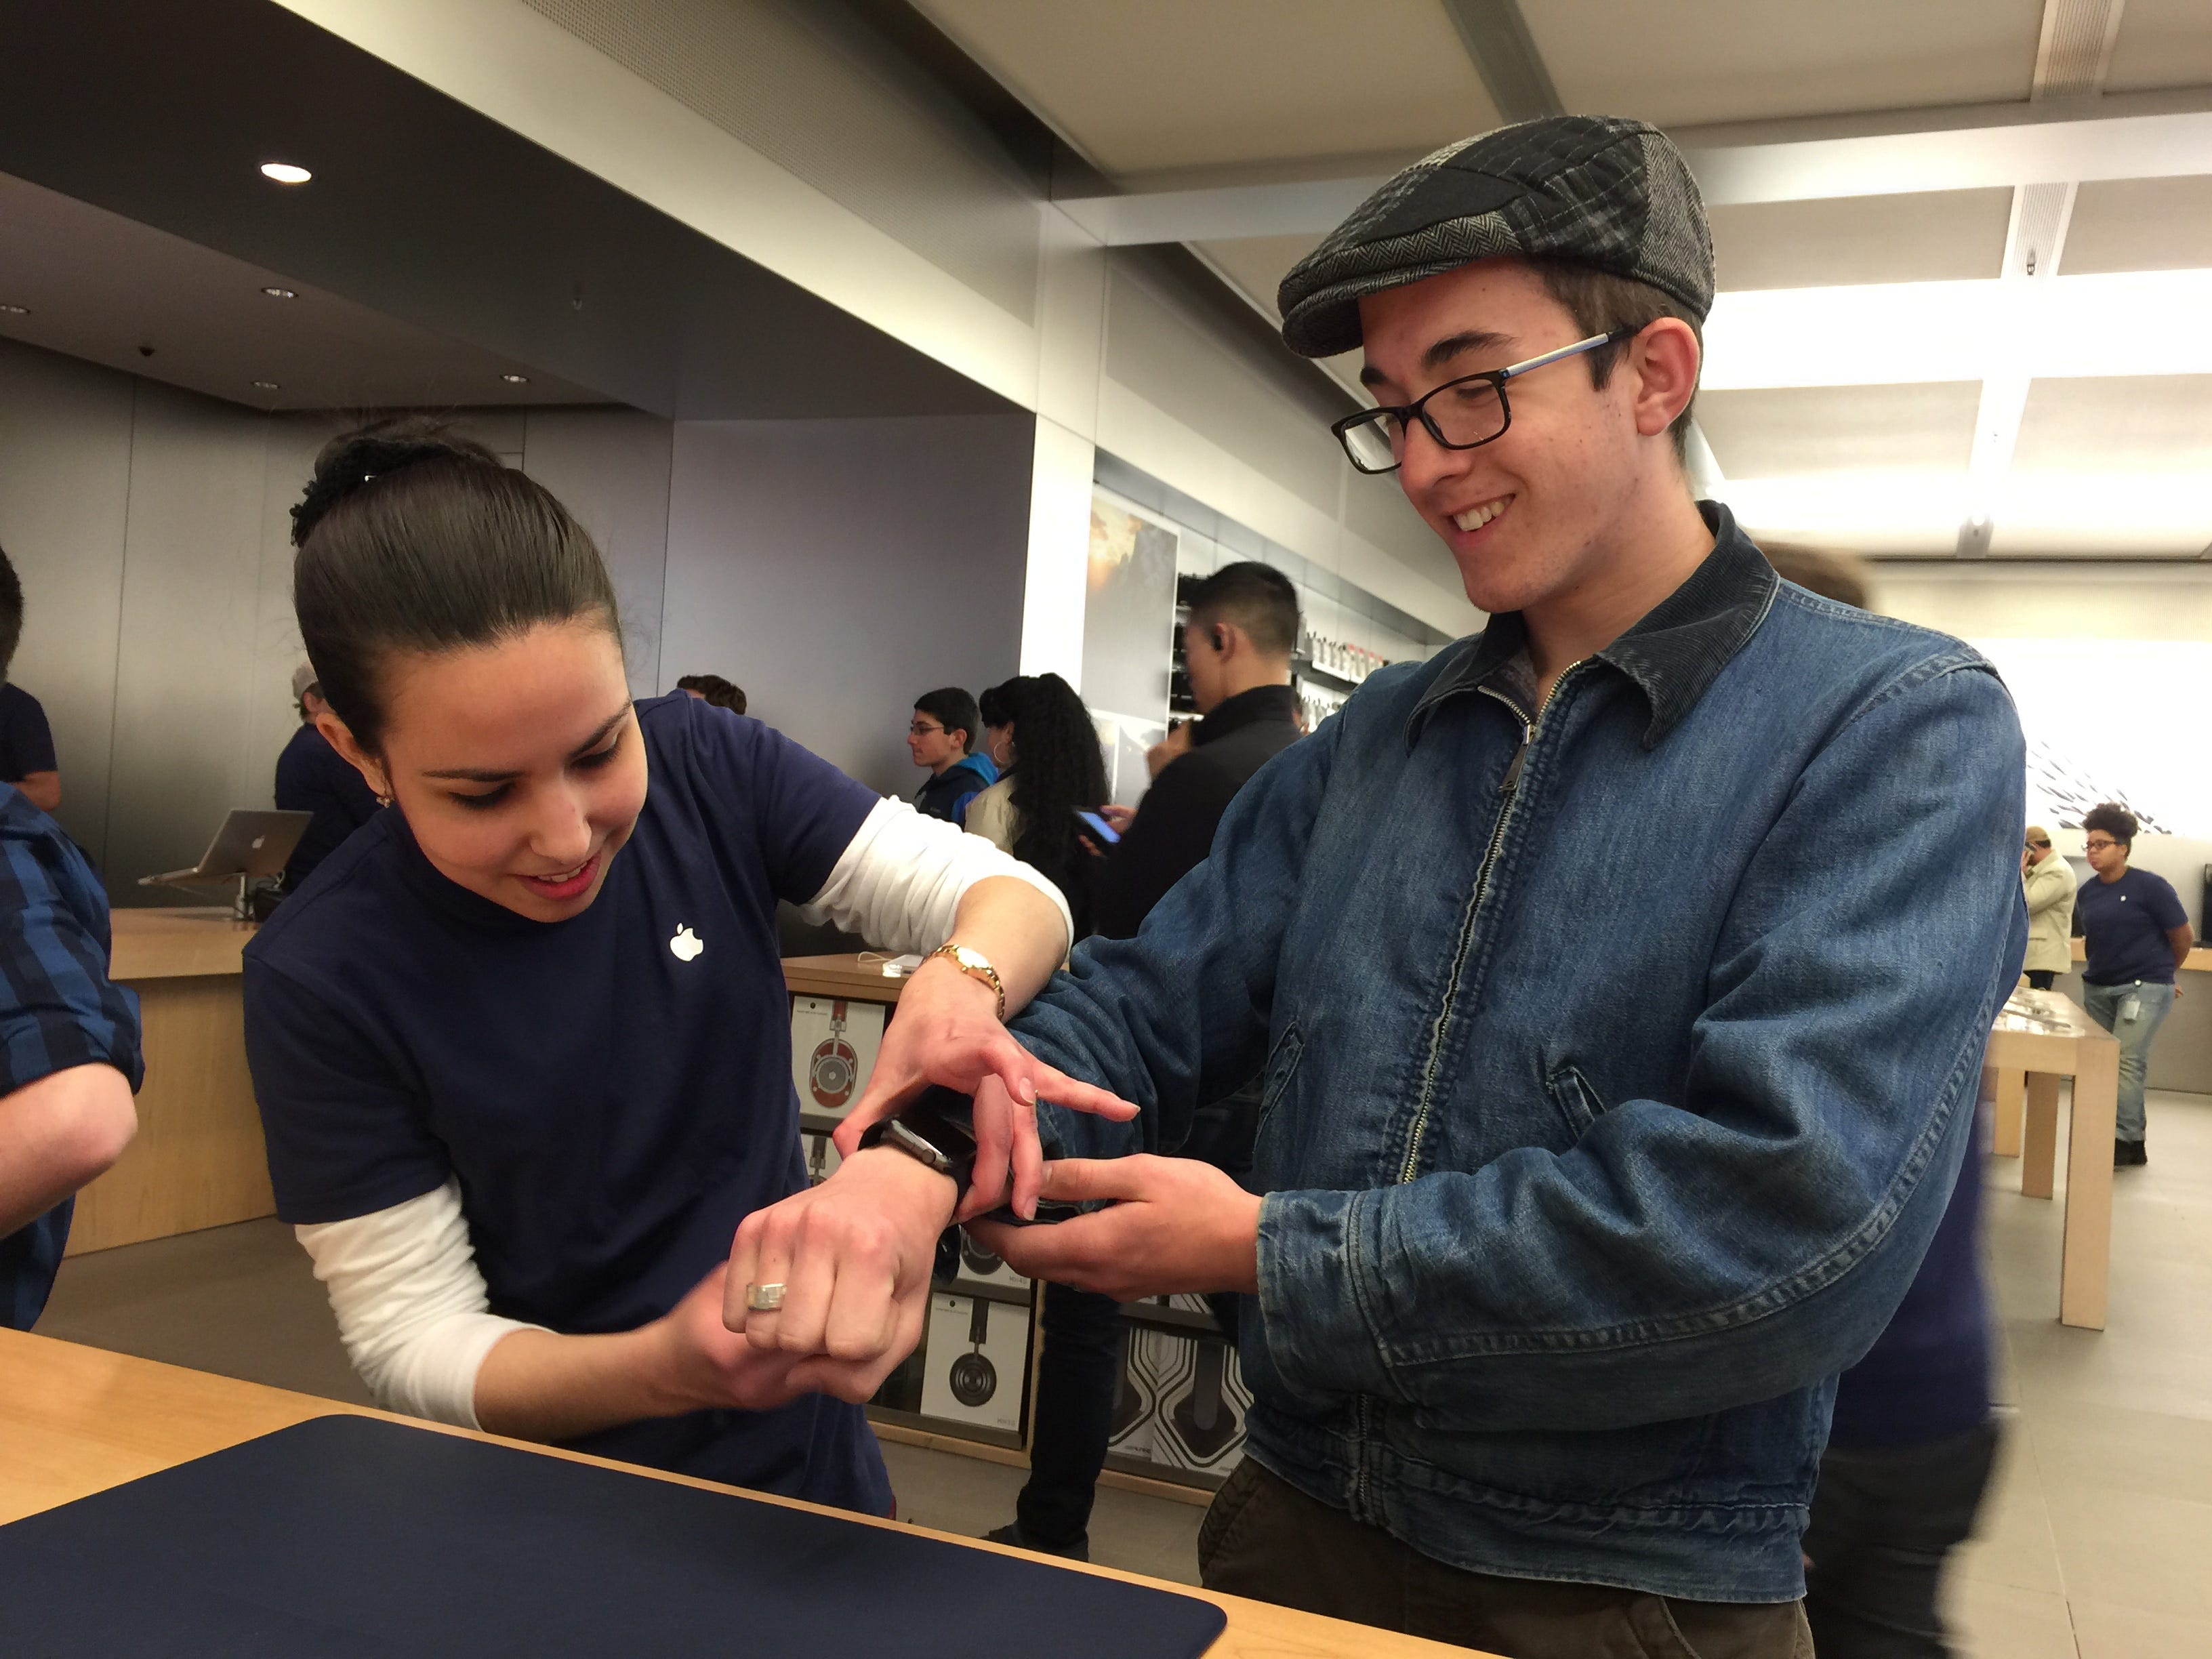 Apple store Apple Watch launch day customer trying on watch